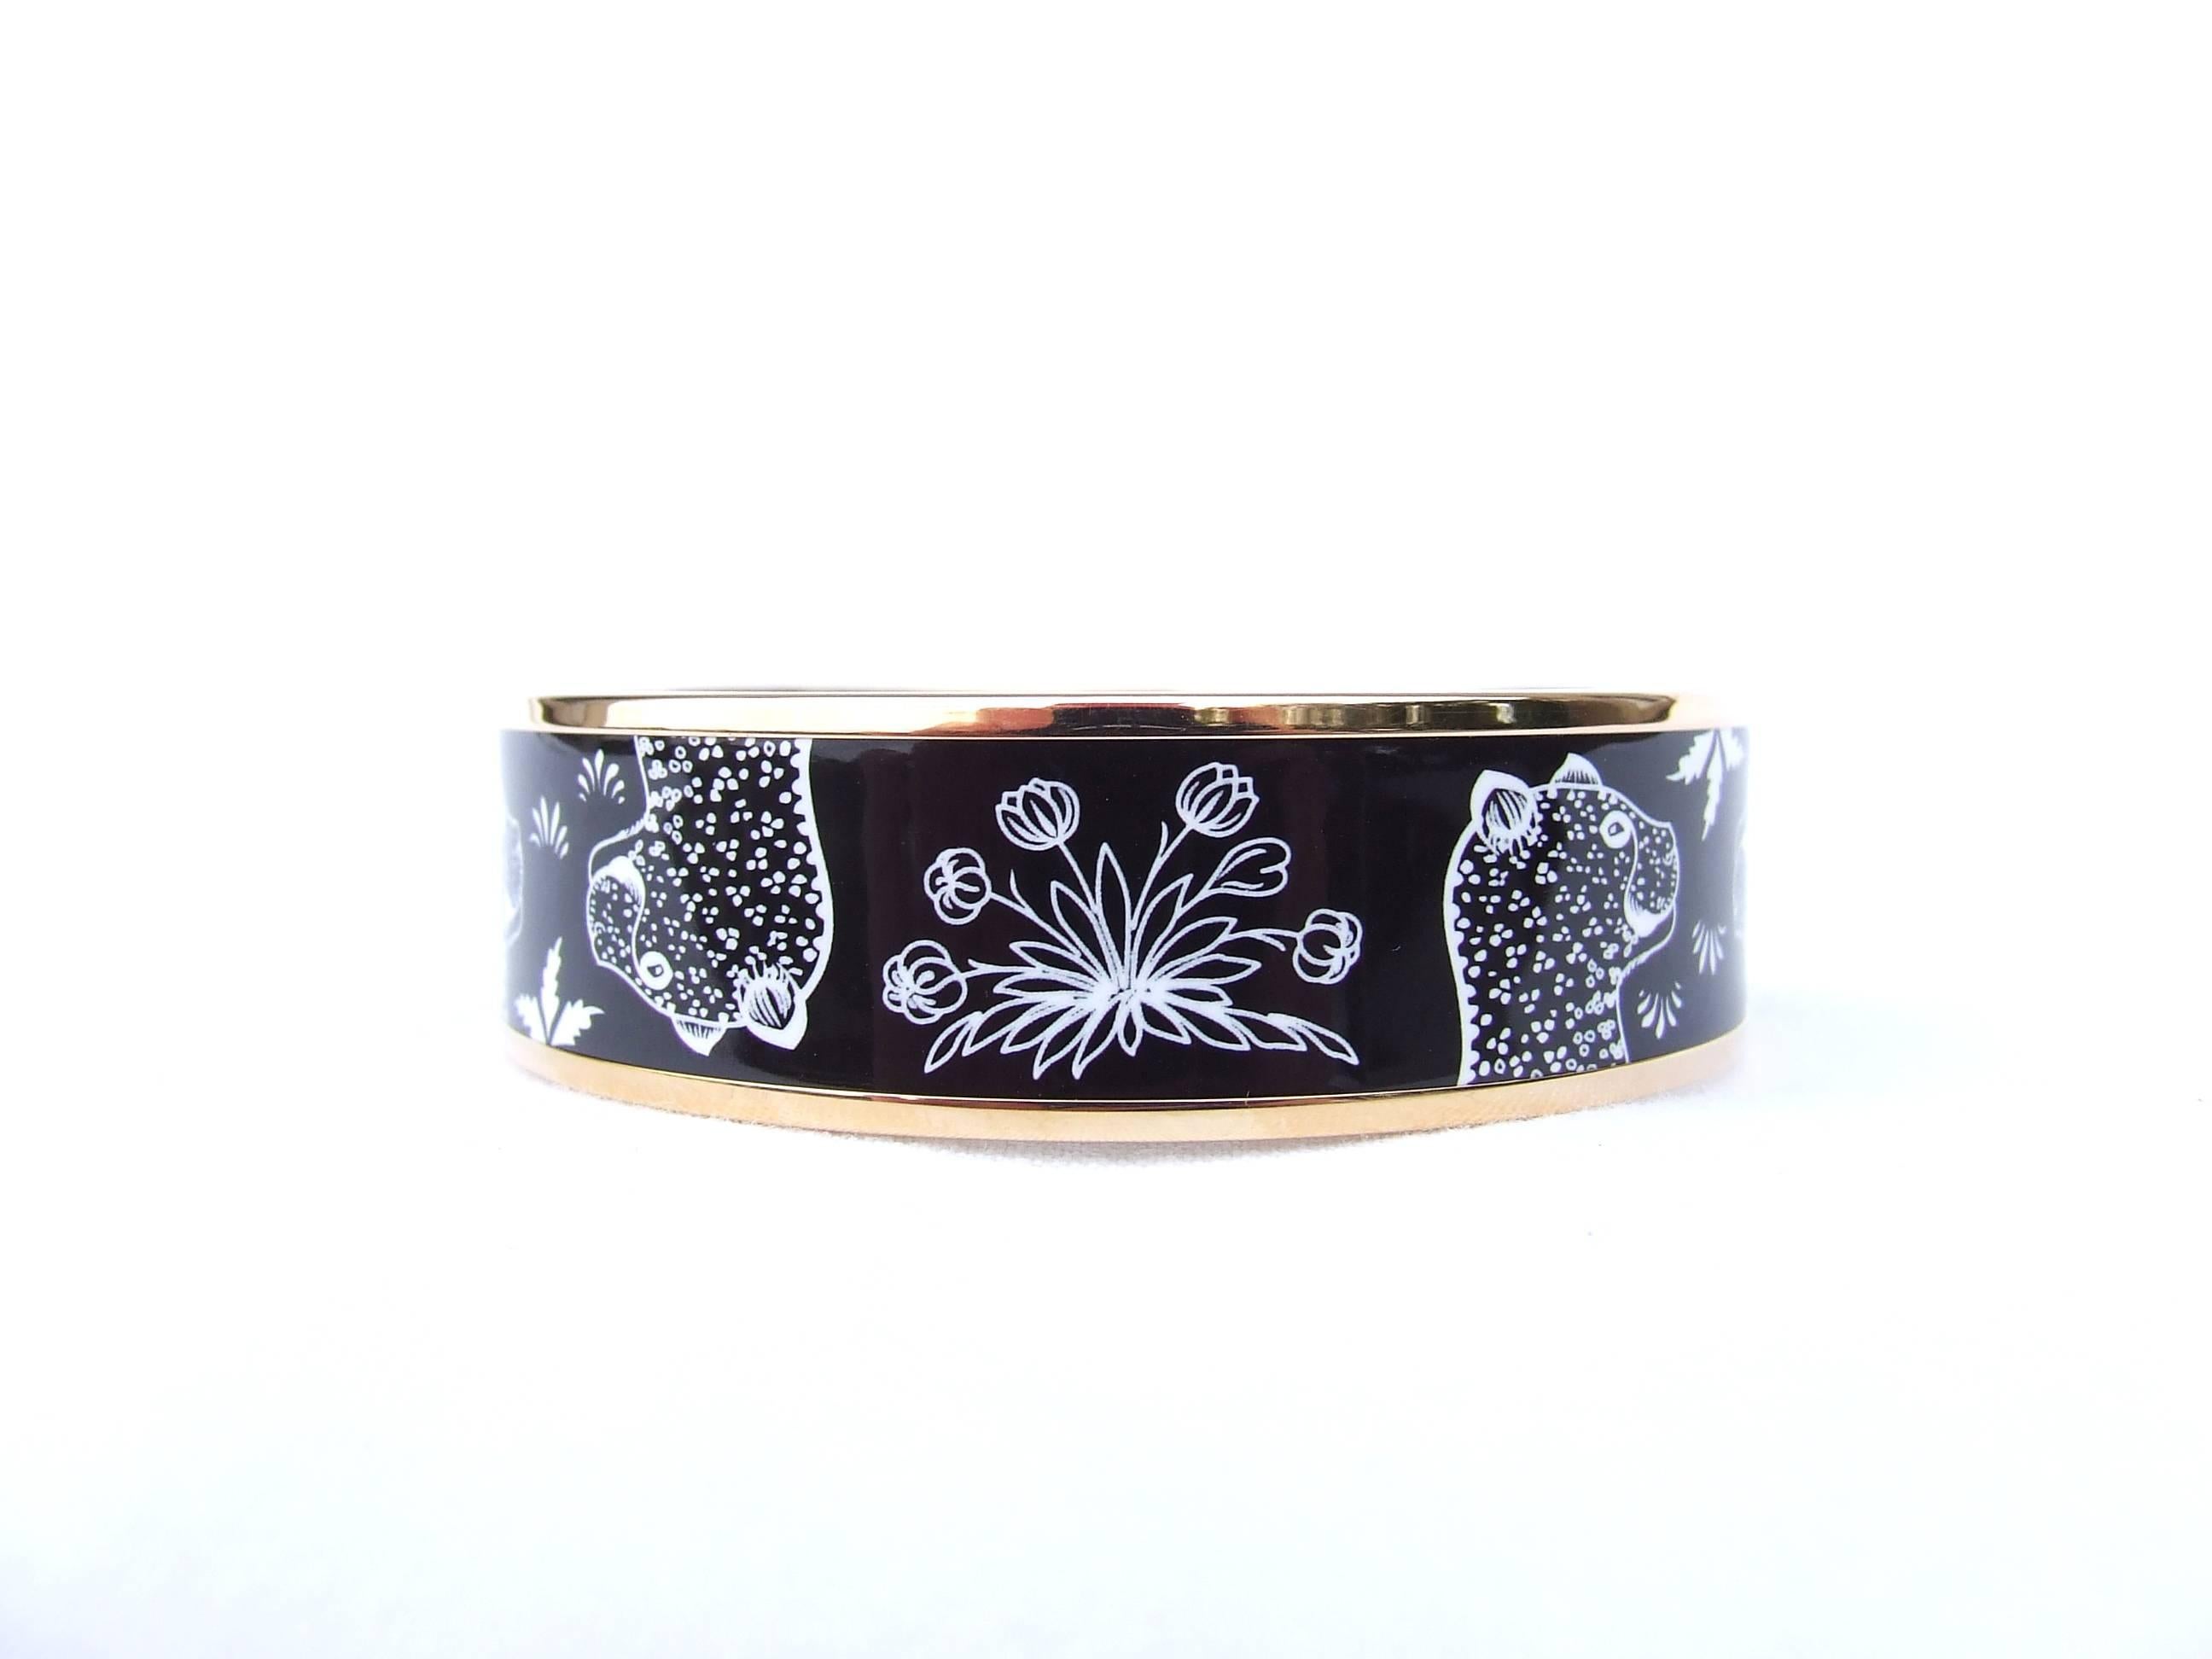 Beautiful Authentic Hermes Bracelet 

"LEOPARDS" 

Made in France

Stamp T (2015)

Made of Enamel Printed and Rose Gold Hardware

Colorways: Black Background, White Leopards

"HERMES PARIS" in golden letters inside

Size: